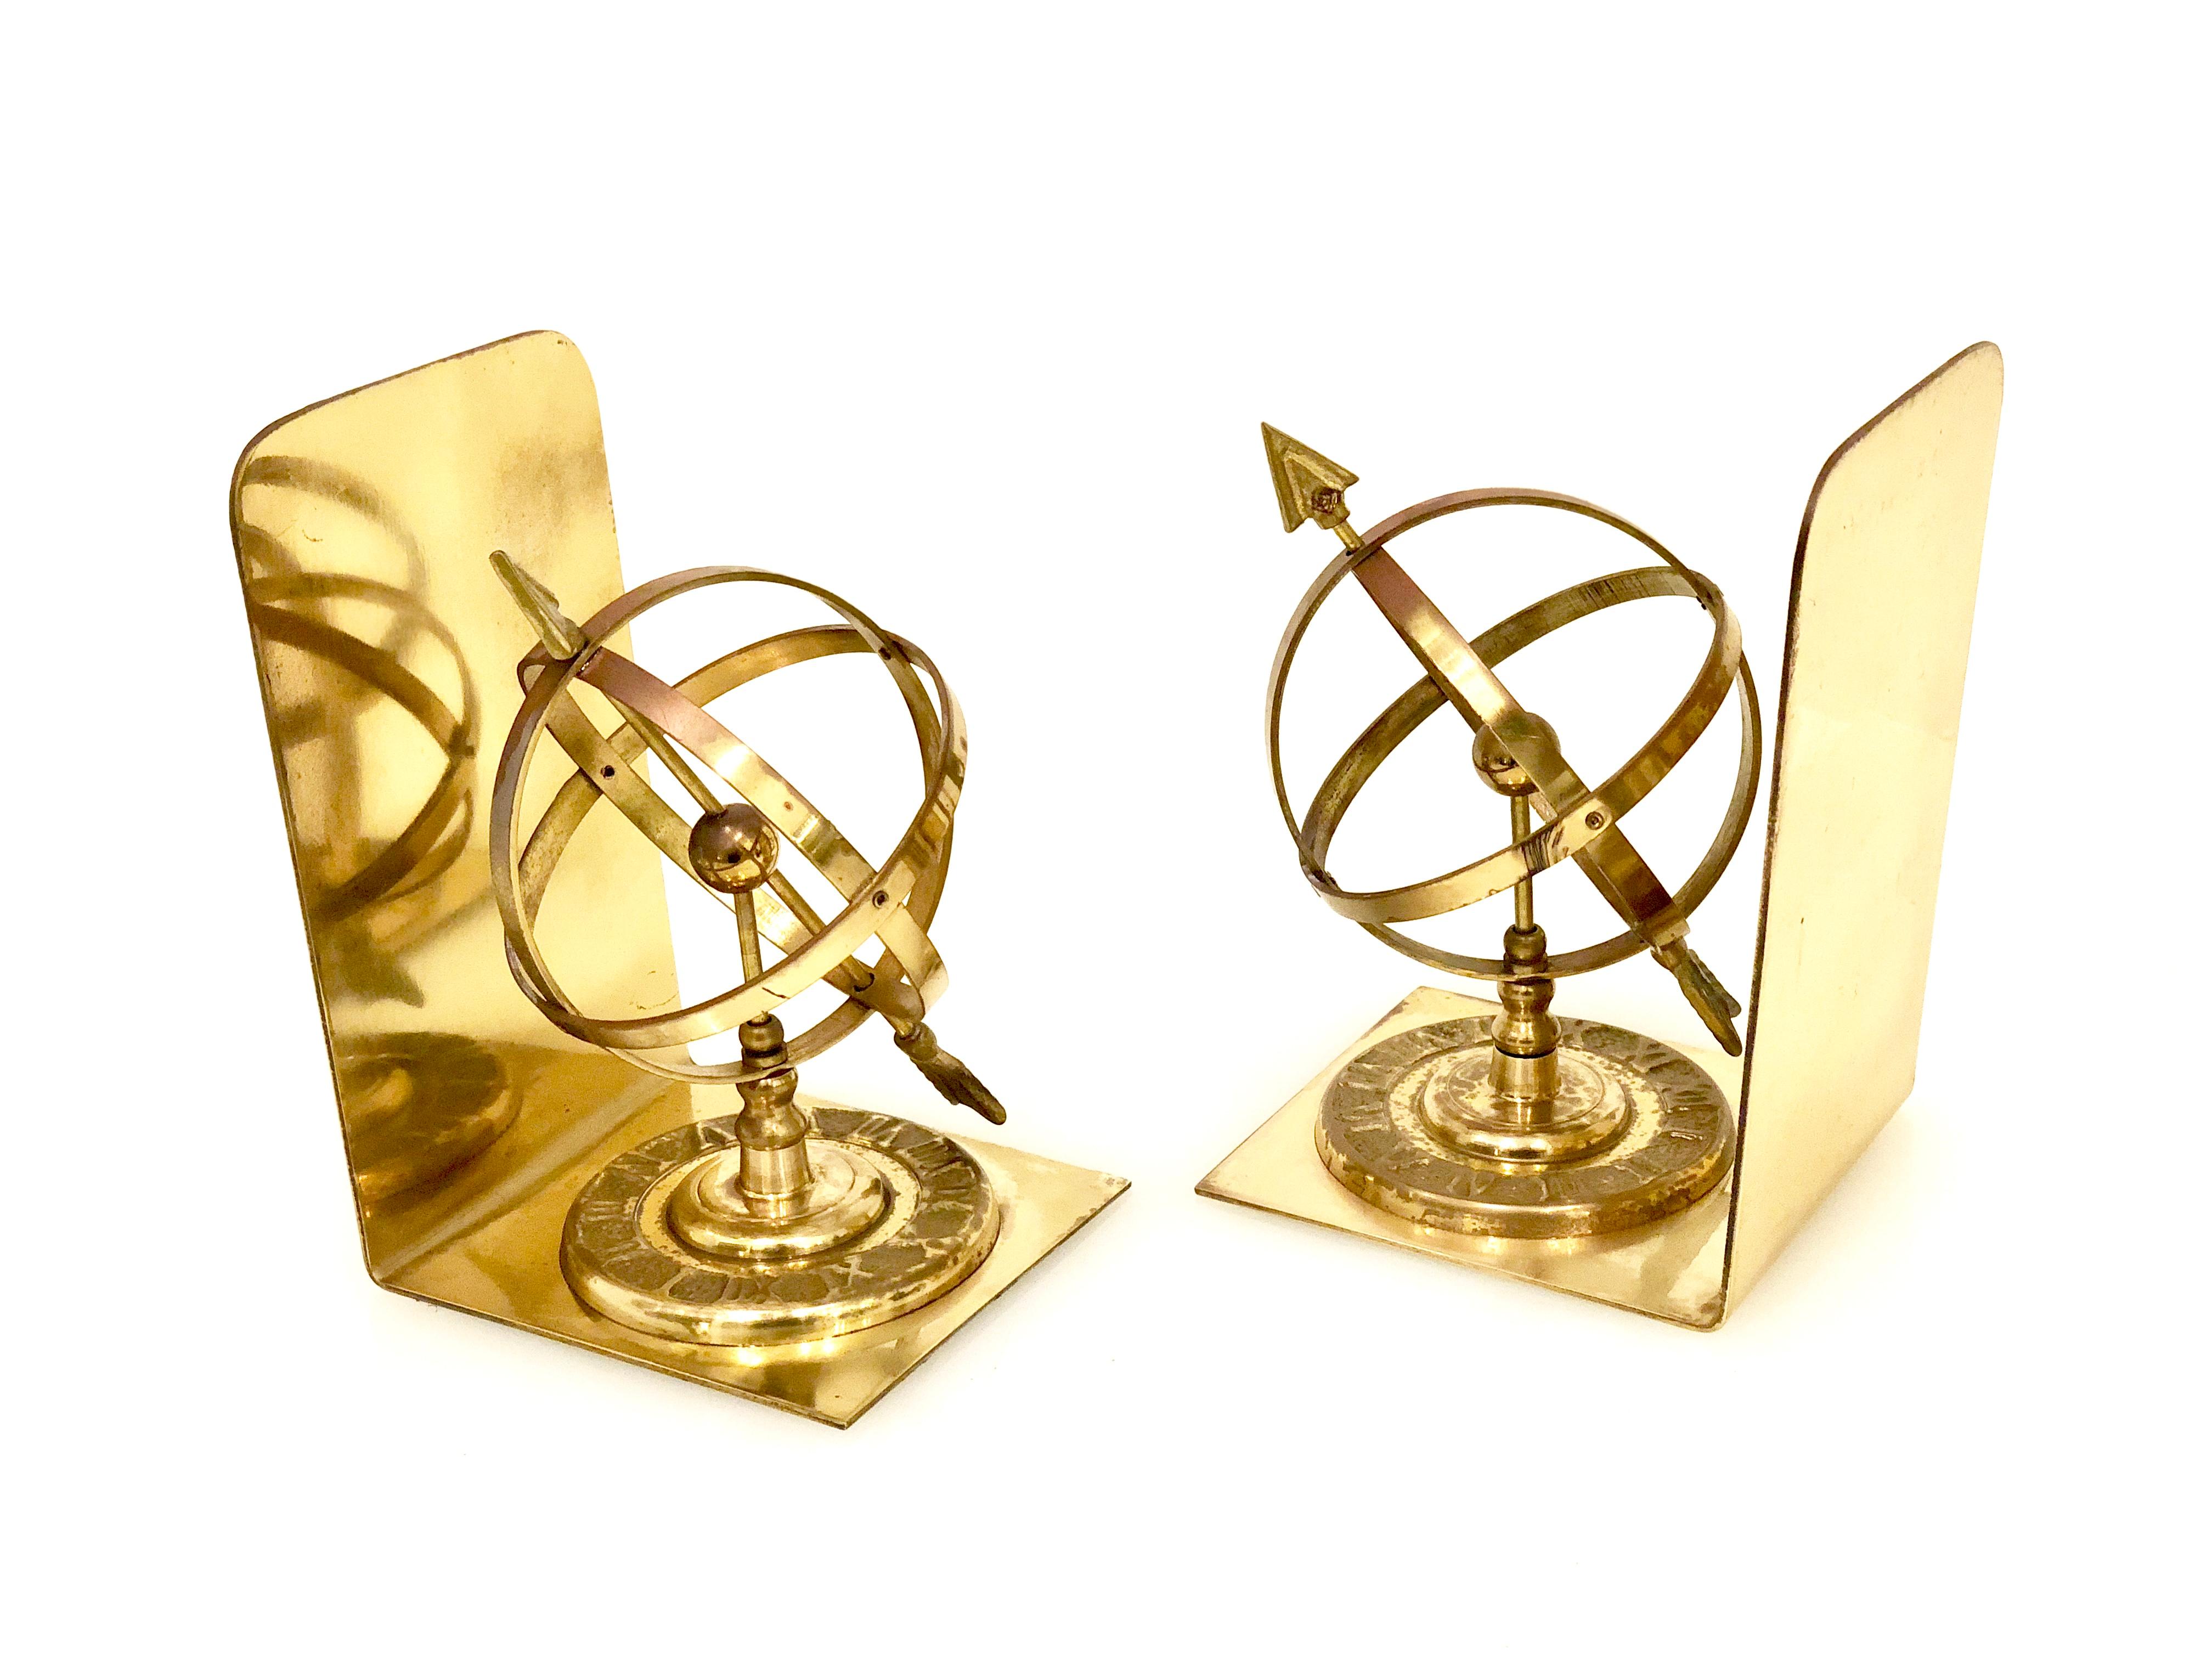 Vintage pair of solid patinated brass bookends with a sundial motif.